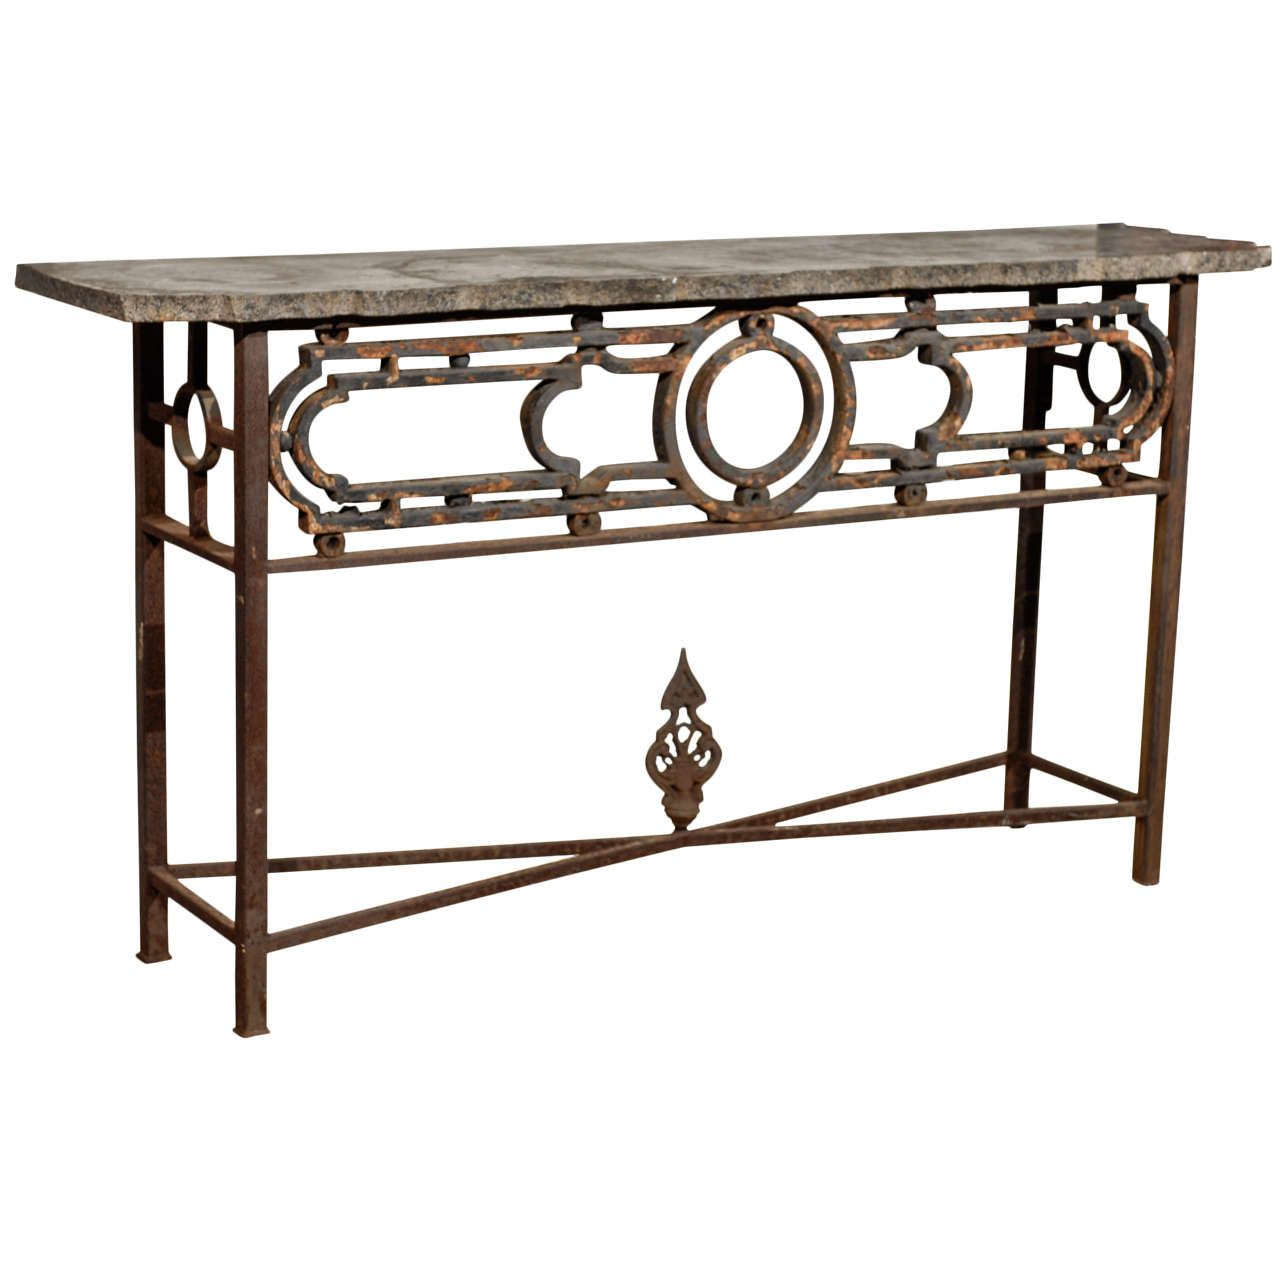 Iron Console Table For Sale At 1stdibs Regarding Round Iron Console Tables (View 9 of 20)